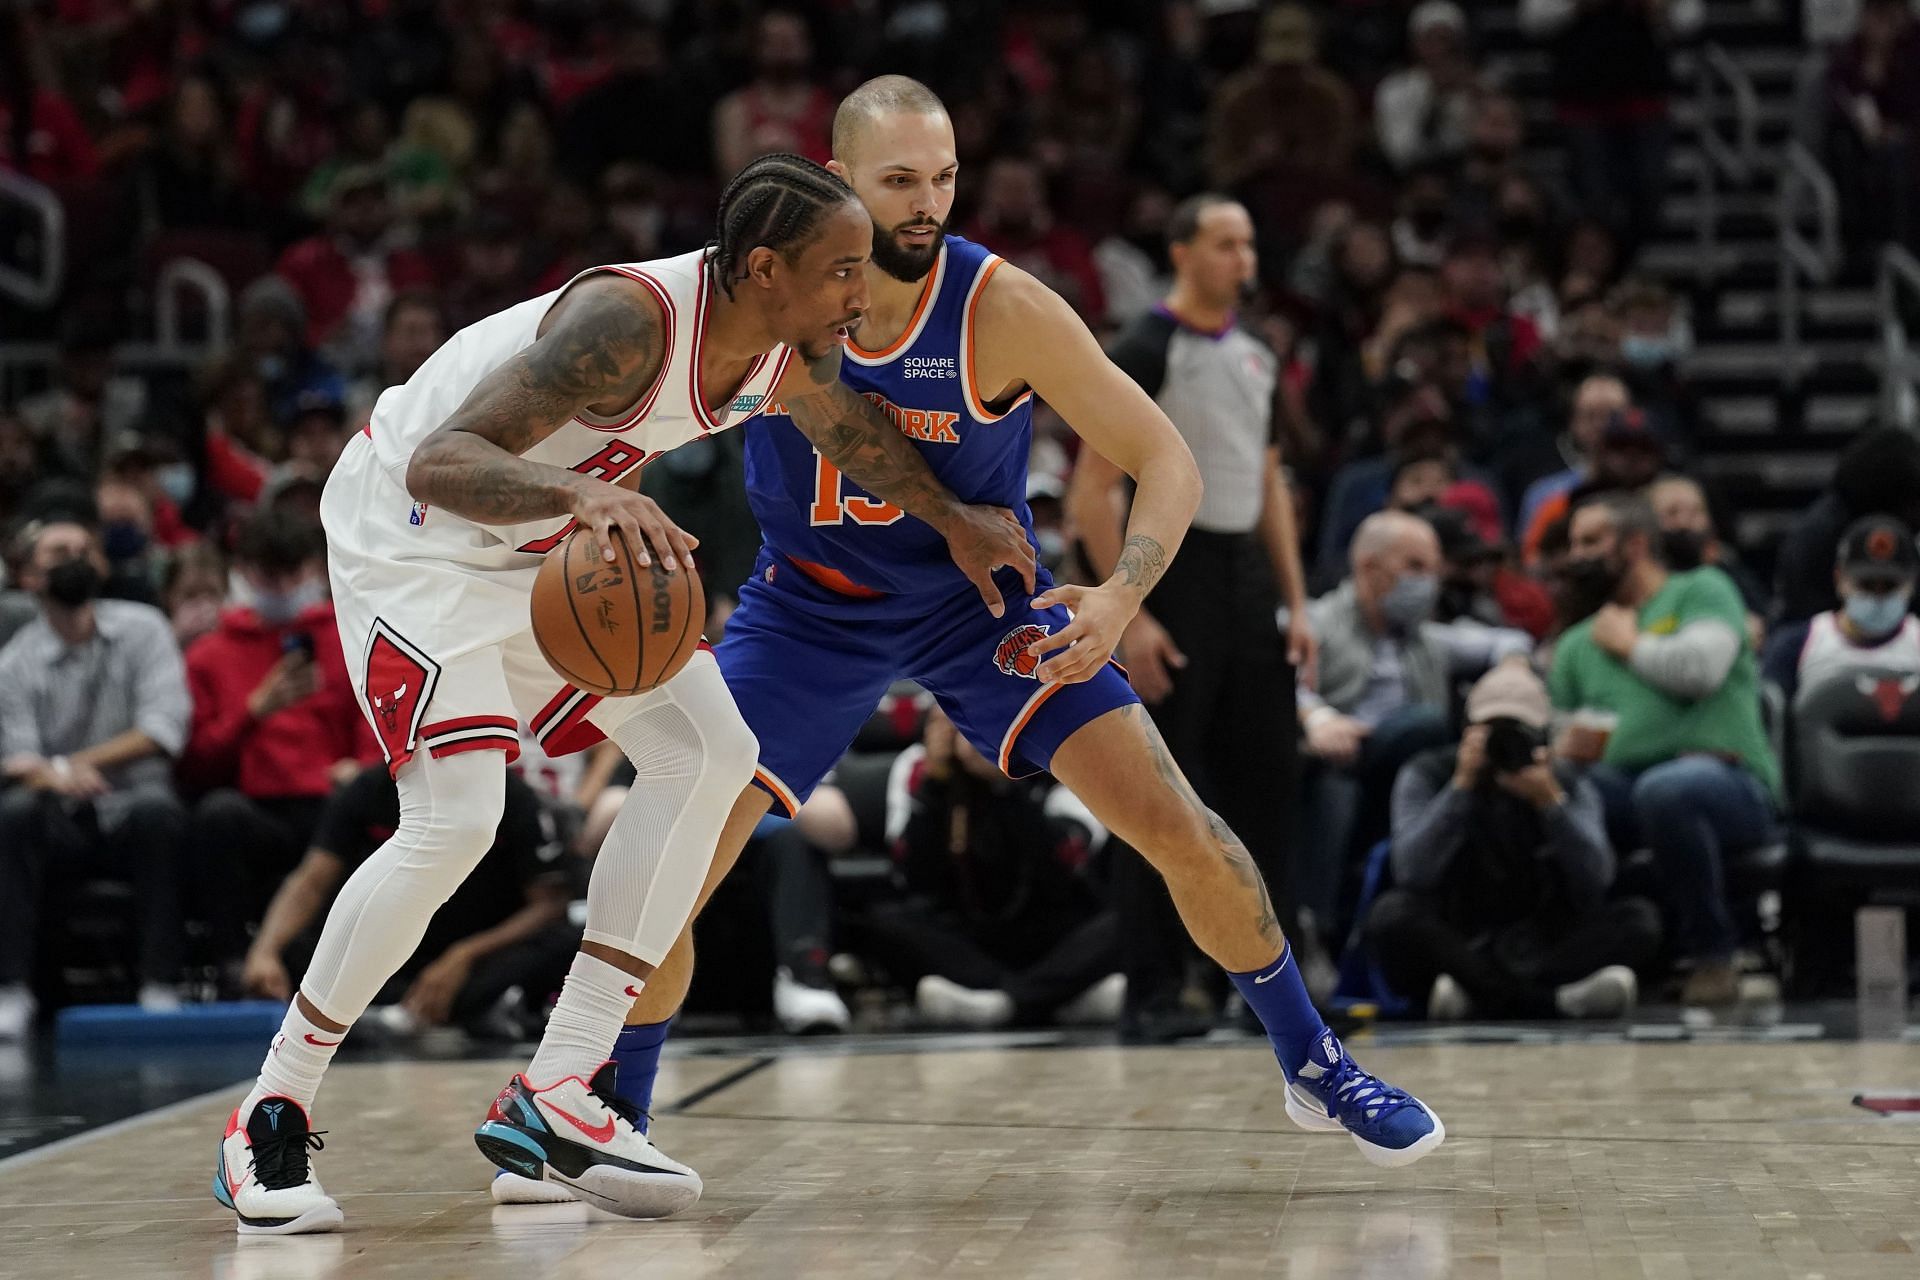 DeMar DeRozan #11 of the Chicago Bulls dribbles the ball against Evan Fournier #13 of the New York Knicks in the first half at United Center on November 21, 2021 in Chicago, Illinois.